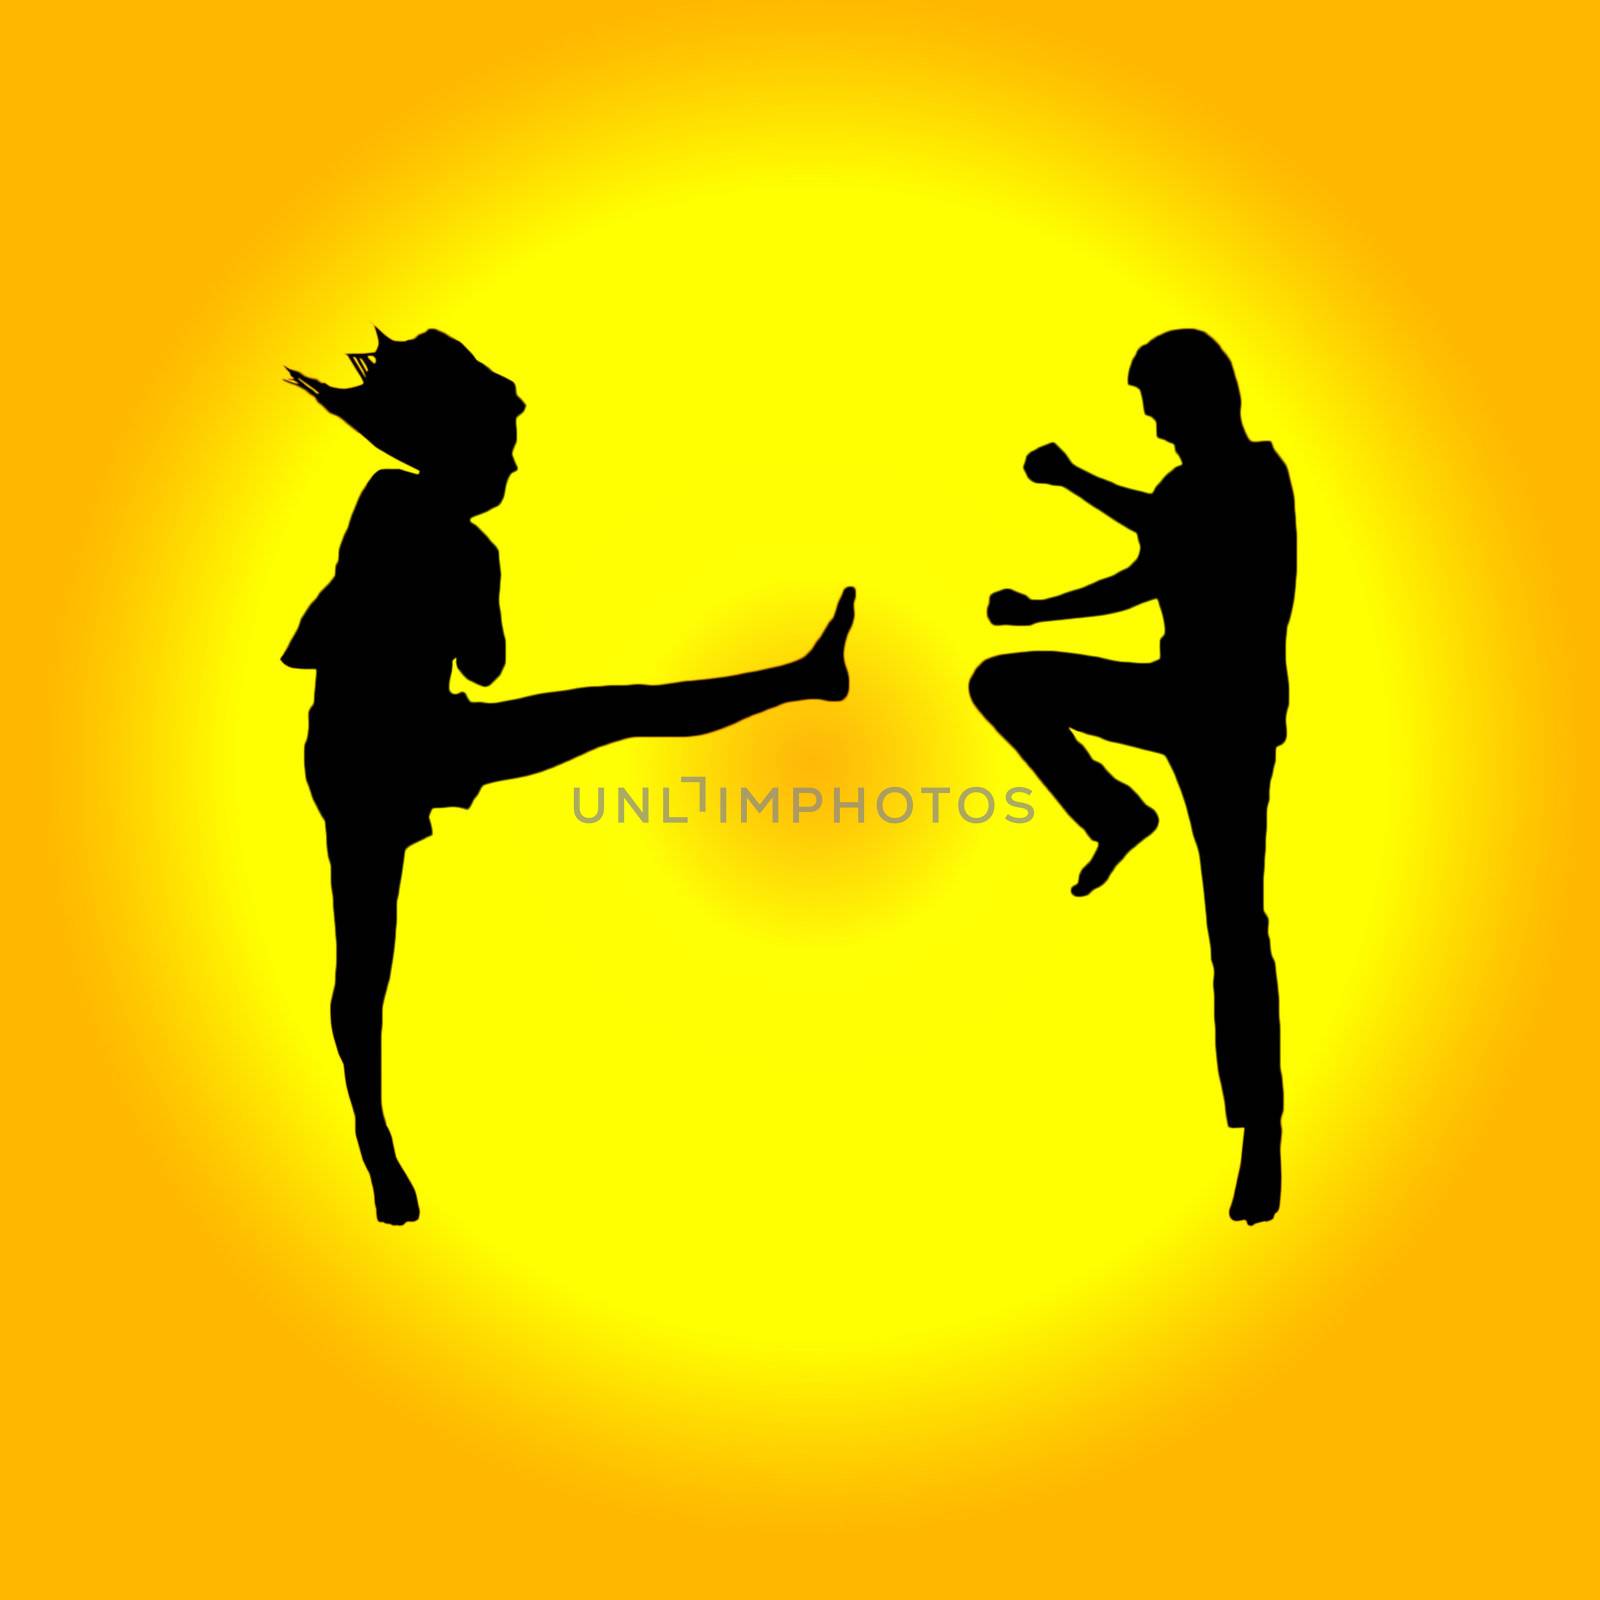 Silhouette of fighting jumping on background by geargodz